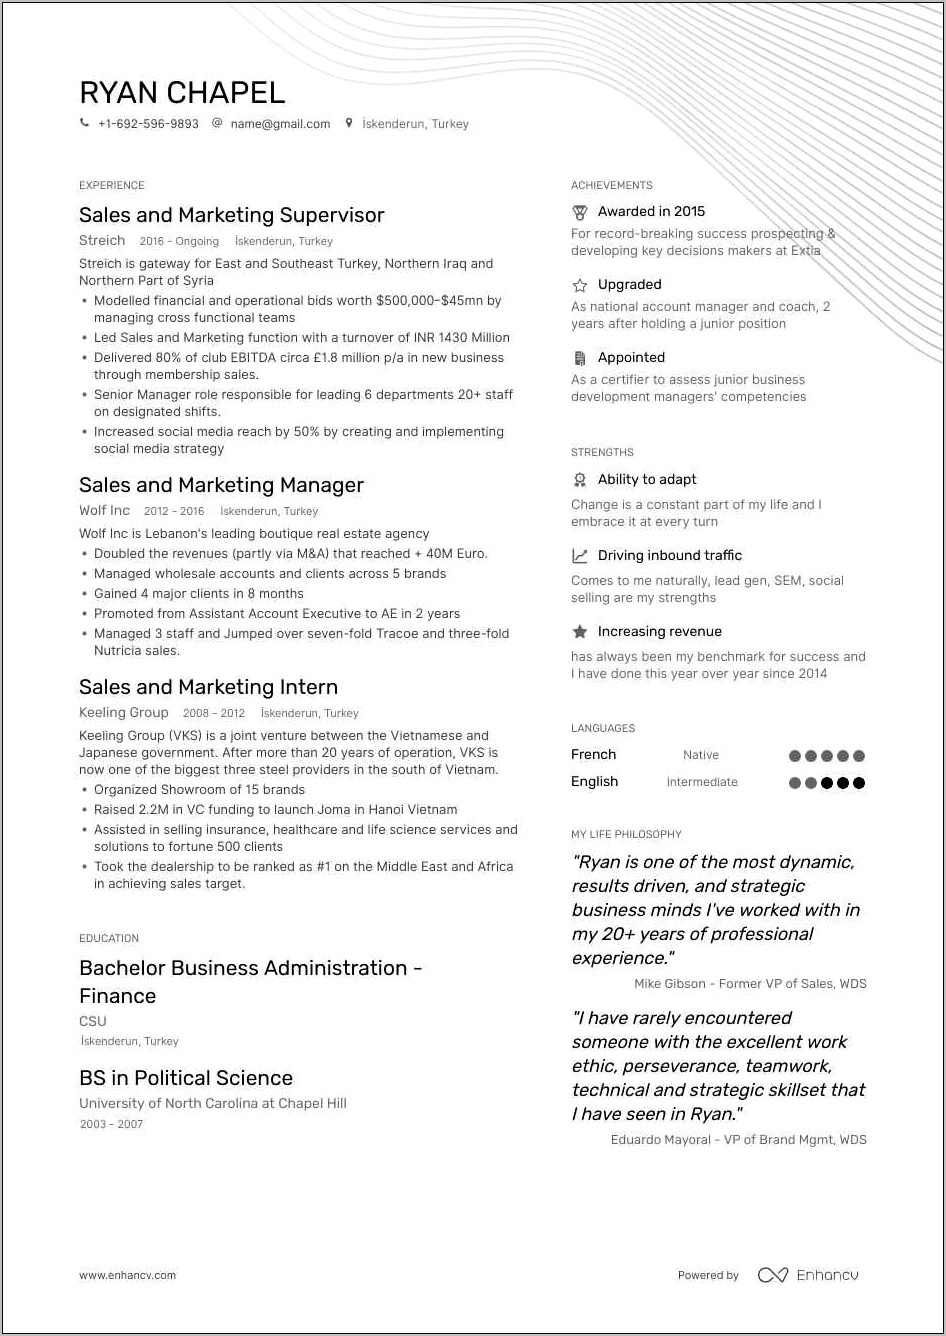 Professional Resume With 20 Years Experience